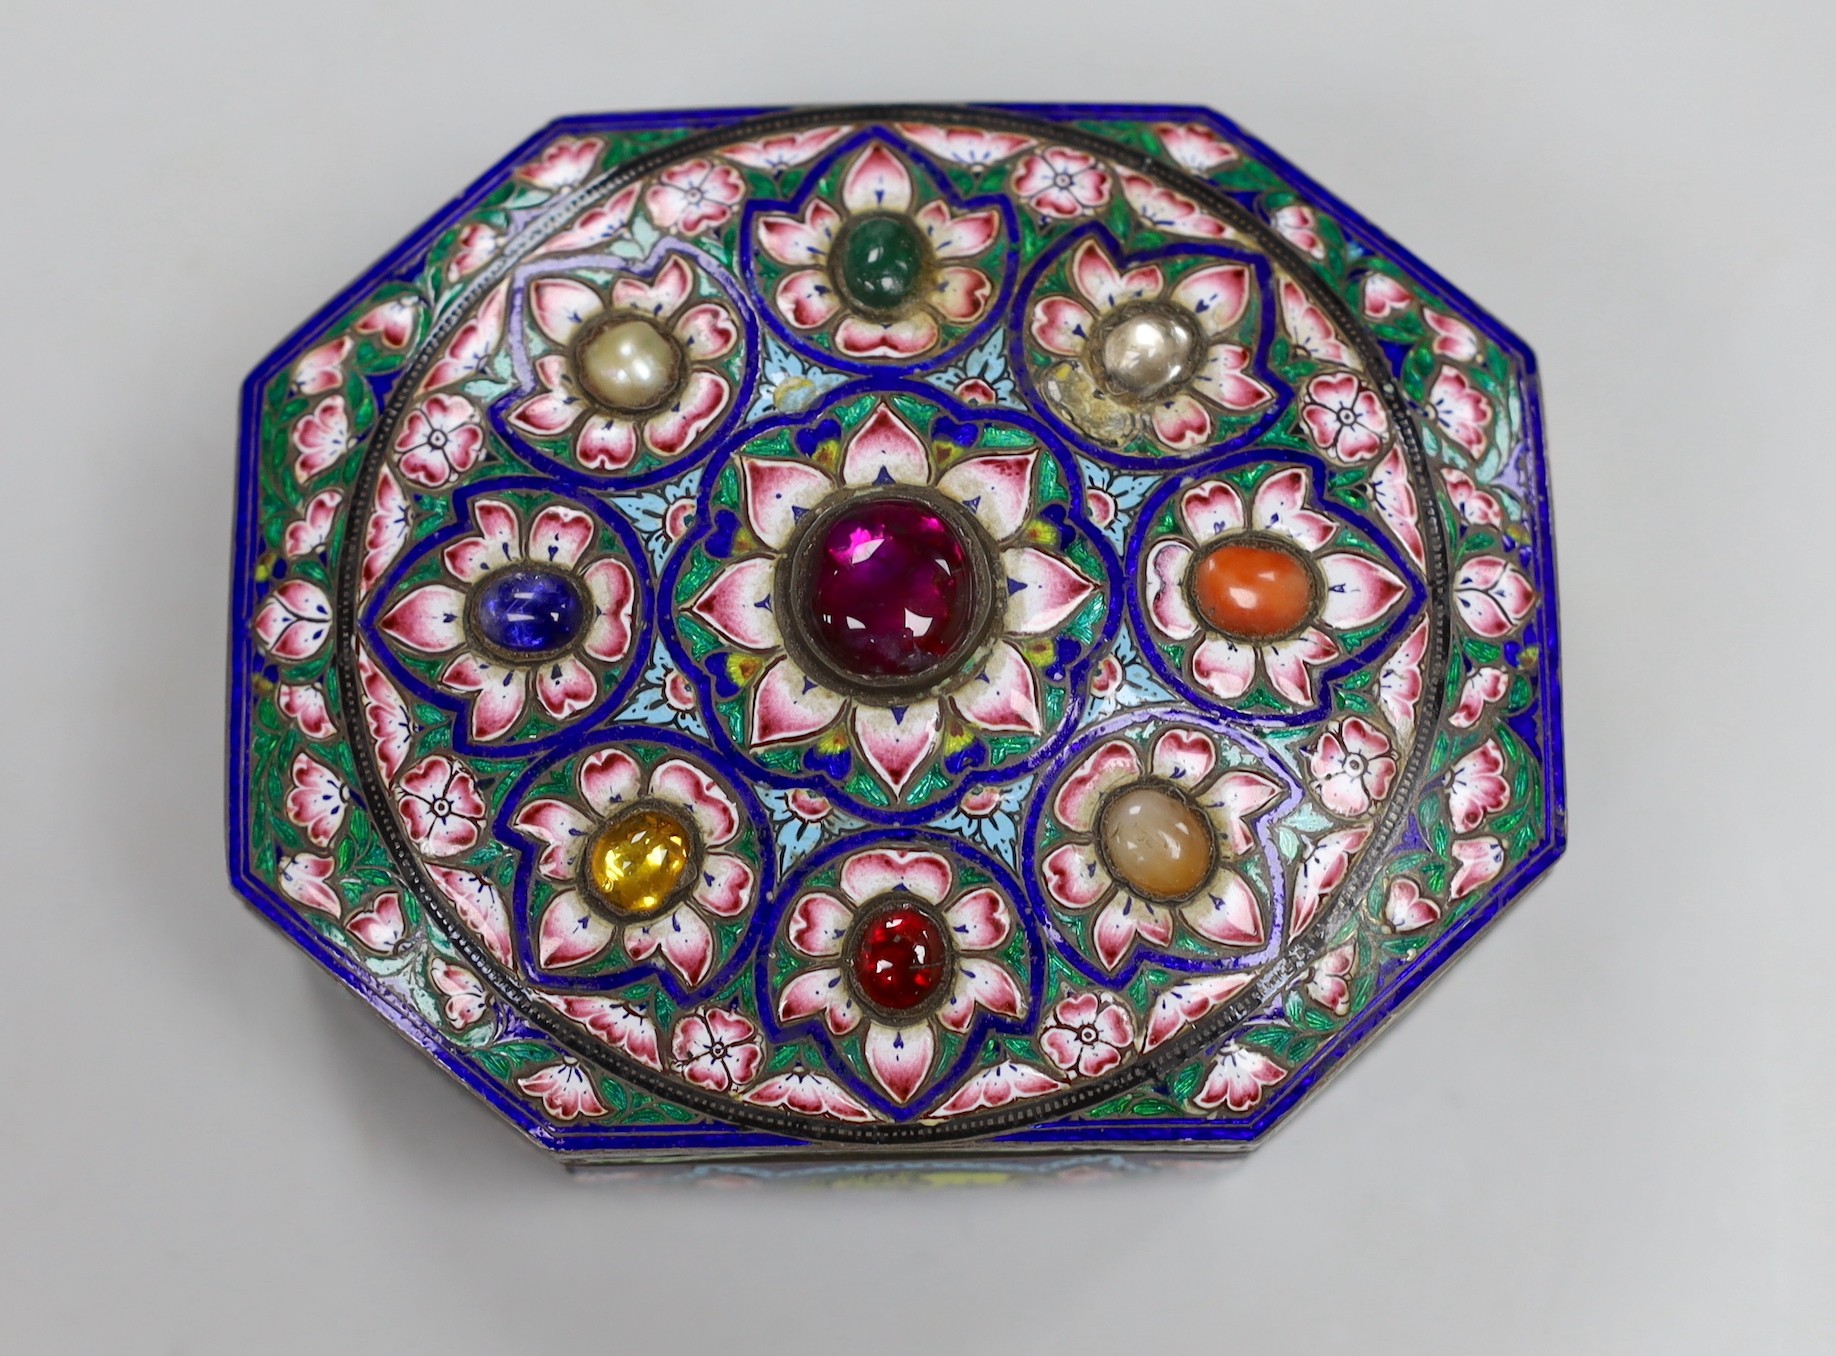 An early 20th century Indian gem set and enamelled gilt white metal trinket box, 10cm long